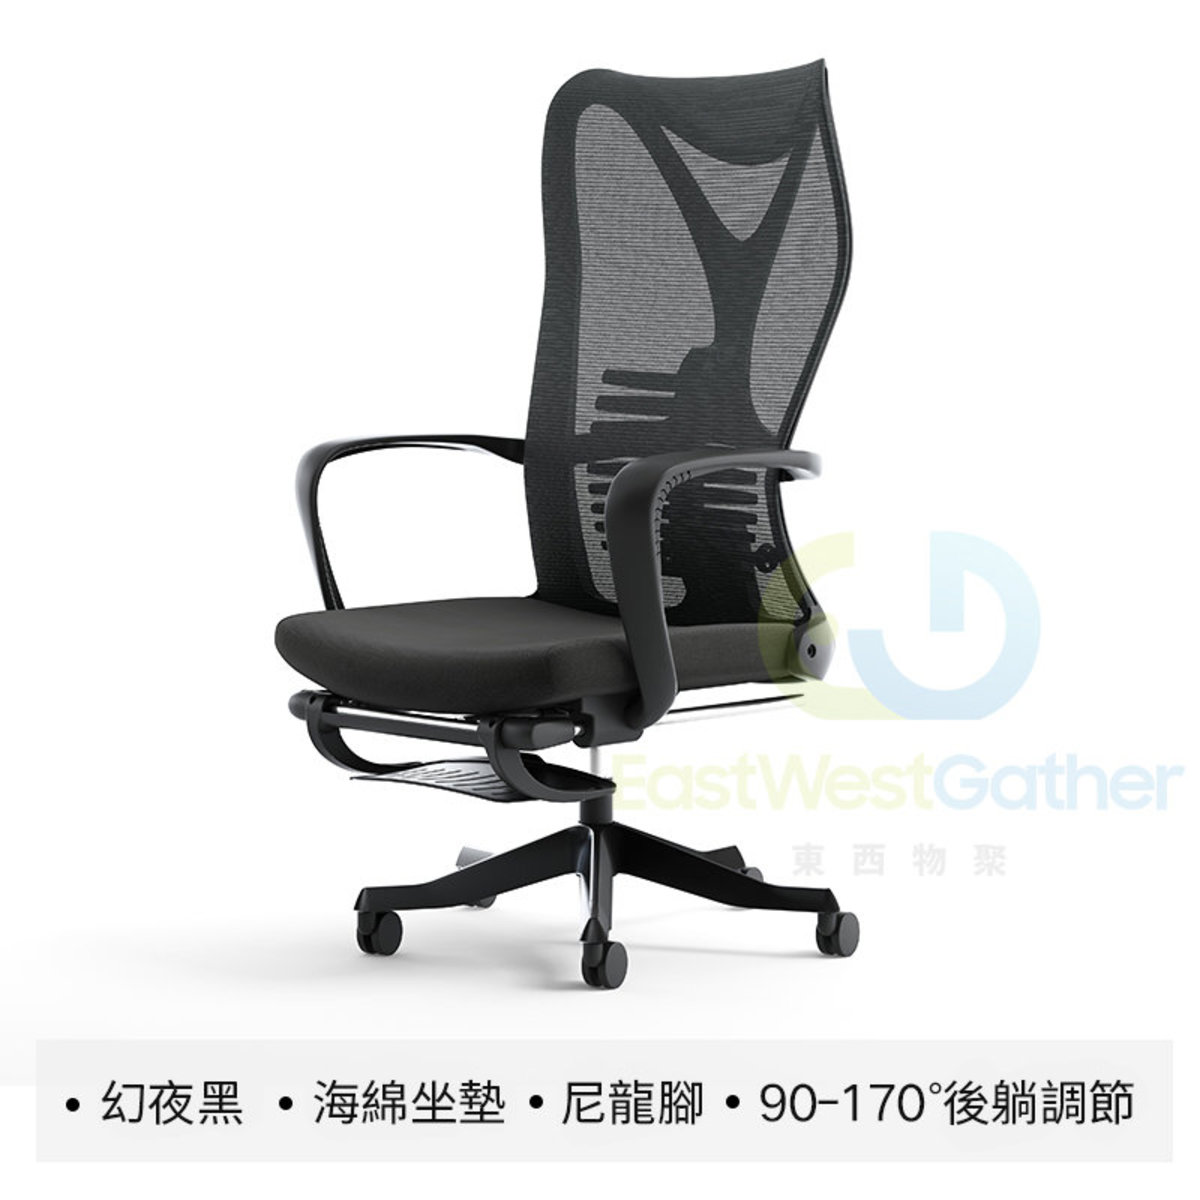 Include installation and delivery black - sponge cushion - nylon foot fixed armrest computer chair